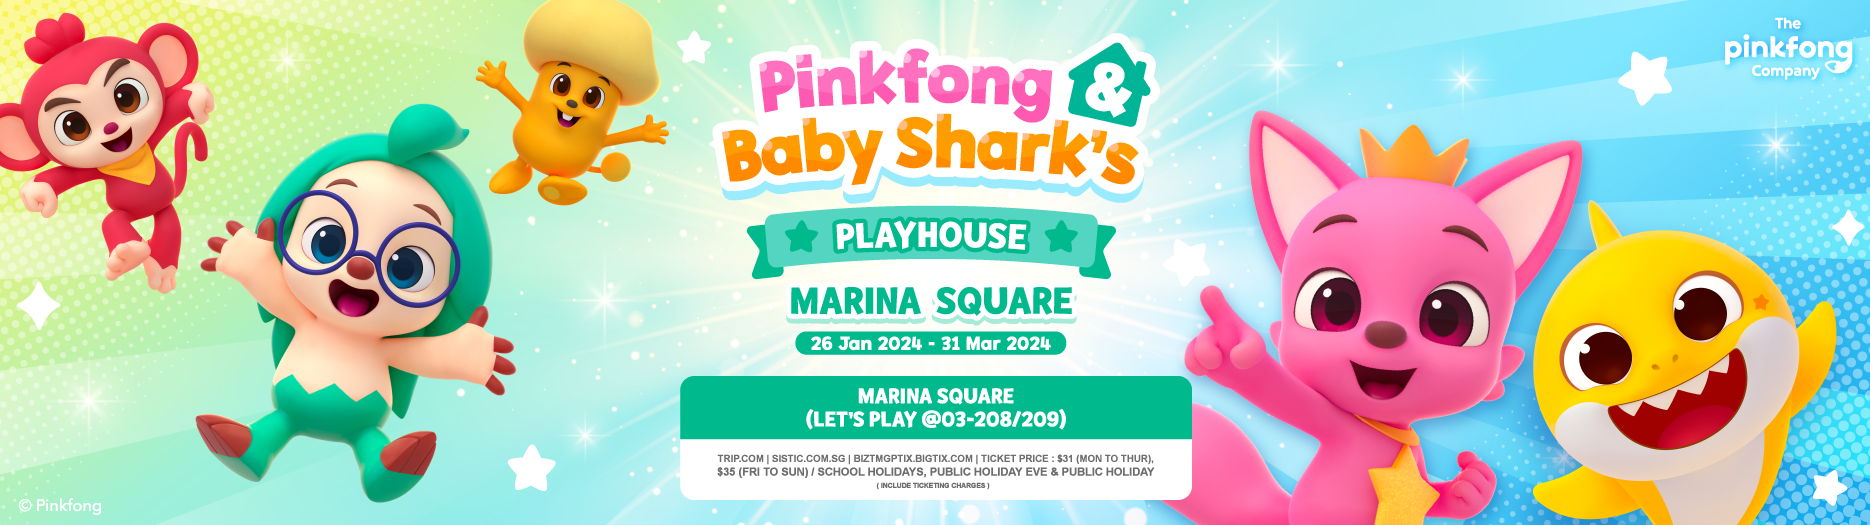 05.02.24_[PFC]revised_Pinkfong-and-Baby-Shark-PLAYHOUSE@MS@Safra-icons@Website-Banner-1870w-X-525h(px)